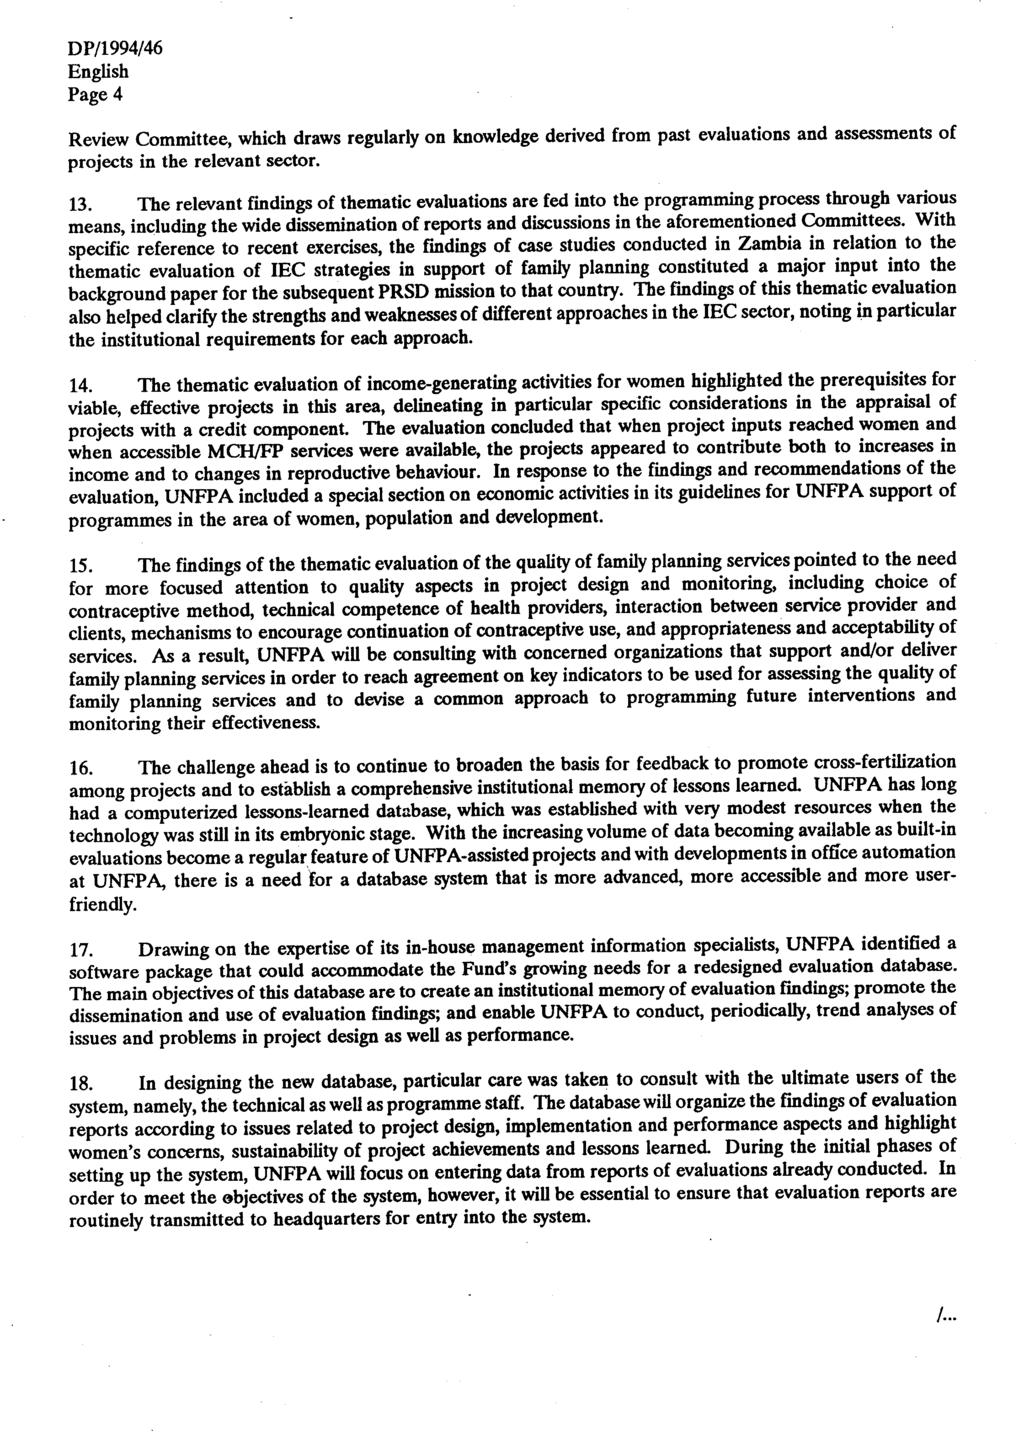 Page 4 Review Committee, which draws regularly on knowledge derived from past evaluations and assessments of projects in the relevant sector. 13.